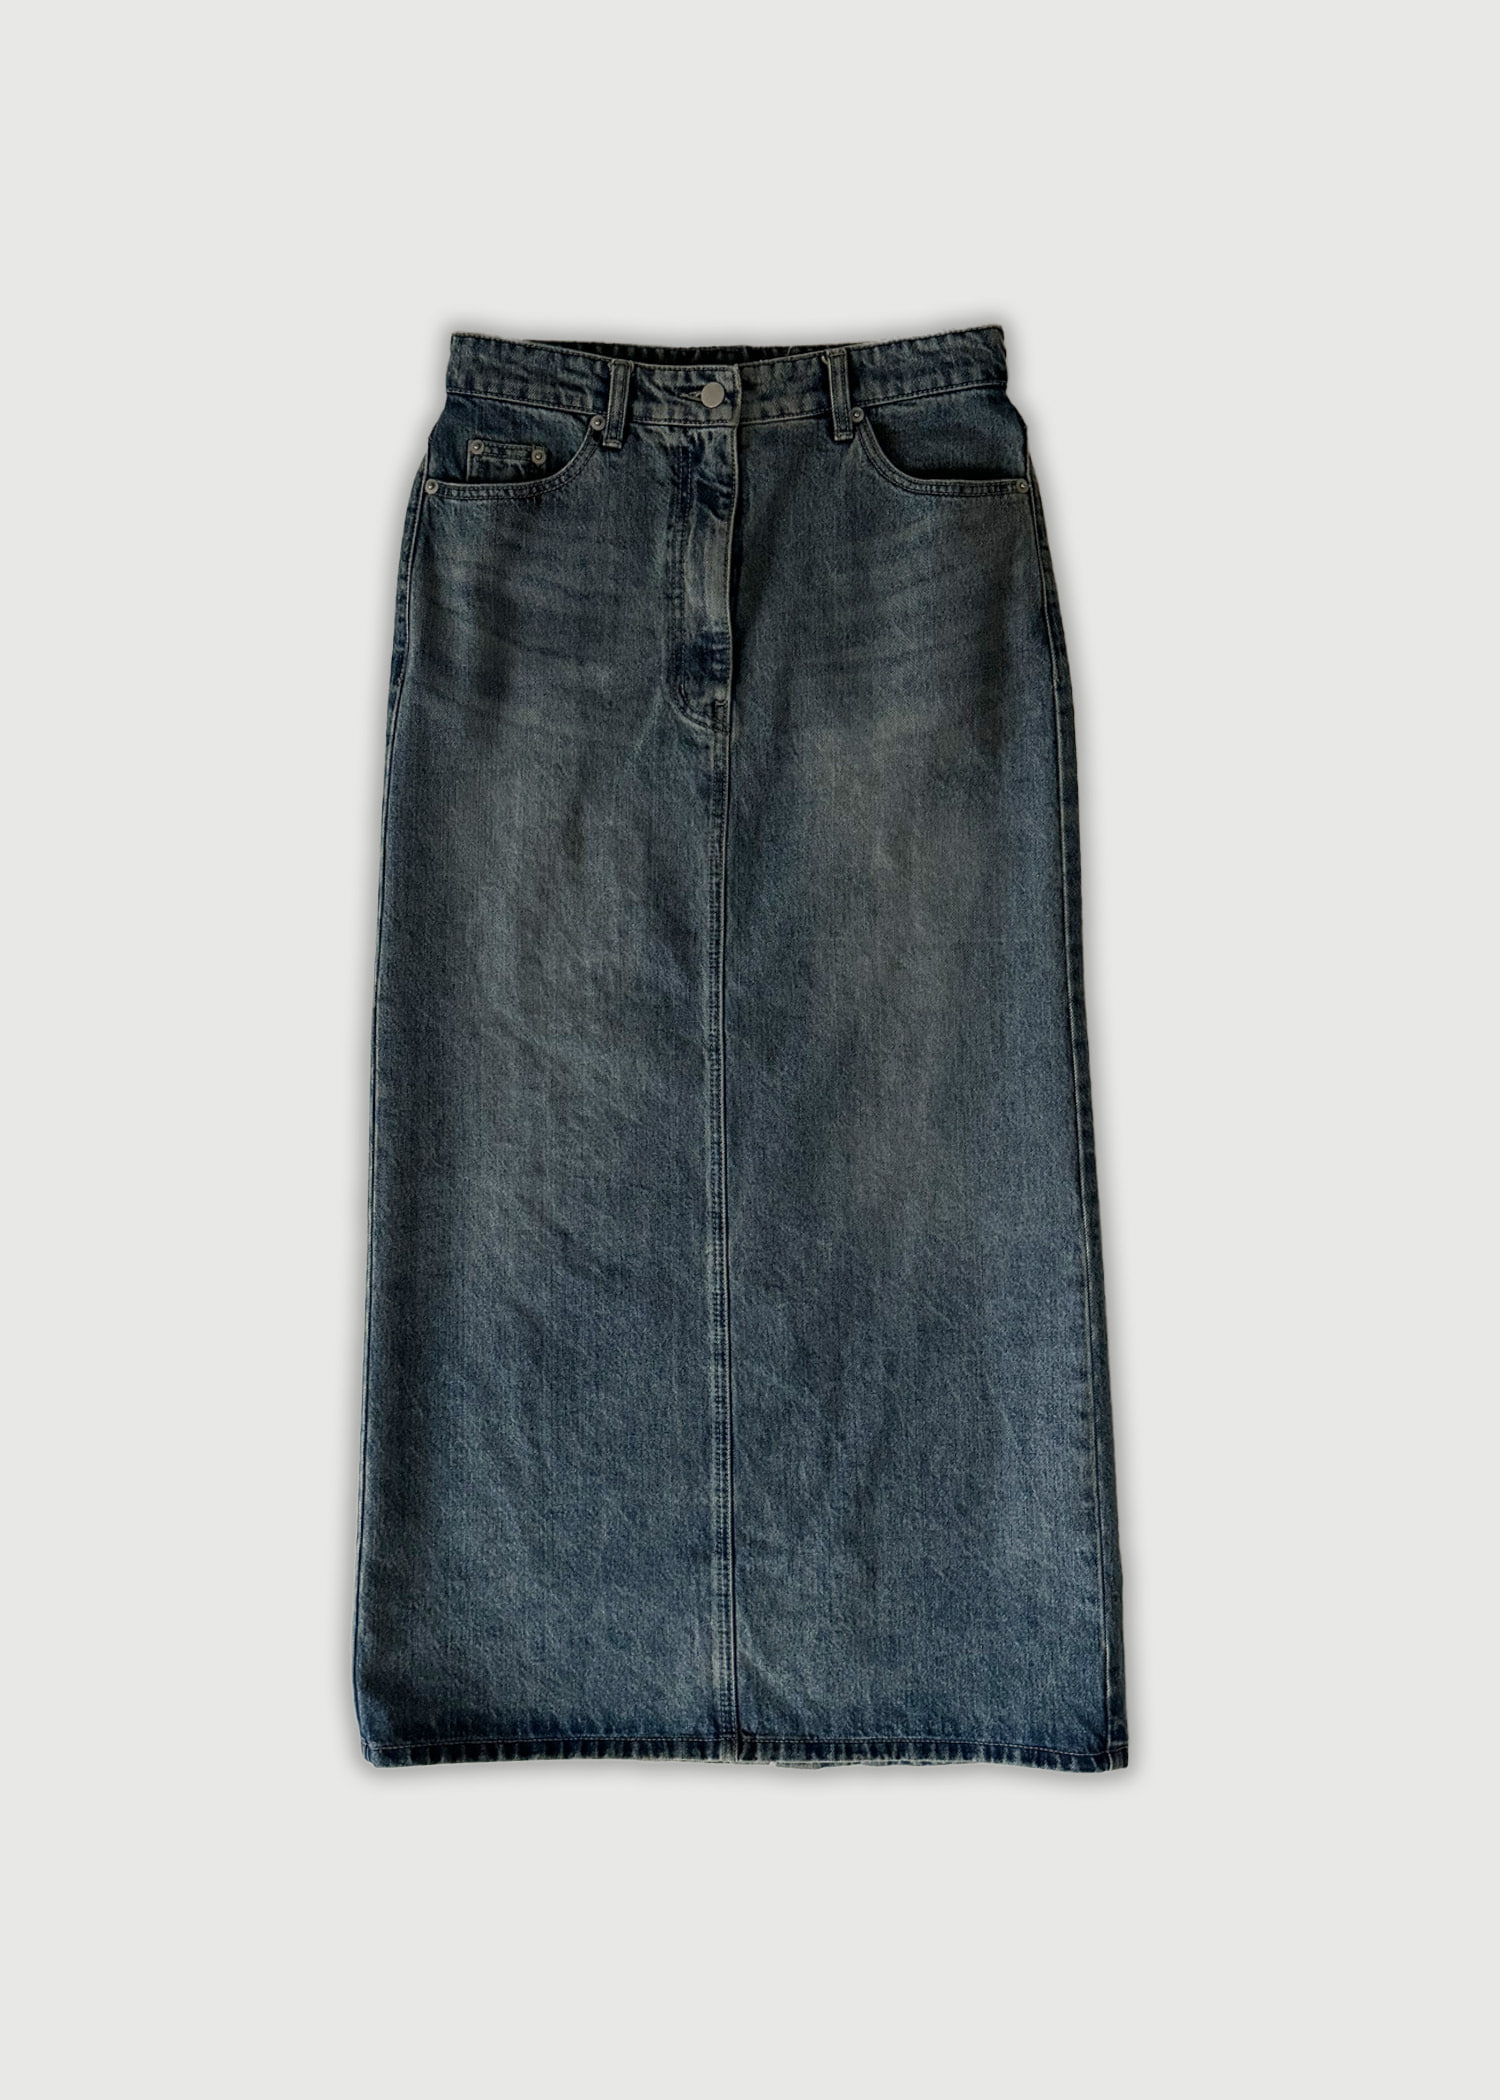 WASHED LONG DENIM SKIRT (FABRIC FROM U.S.A)